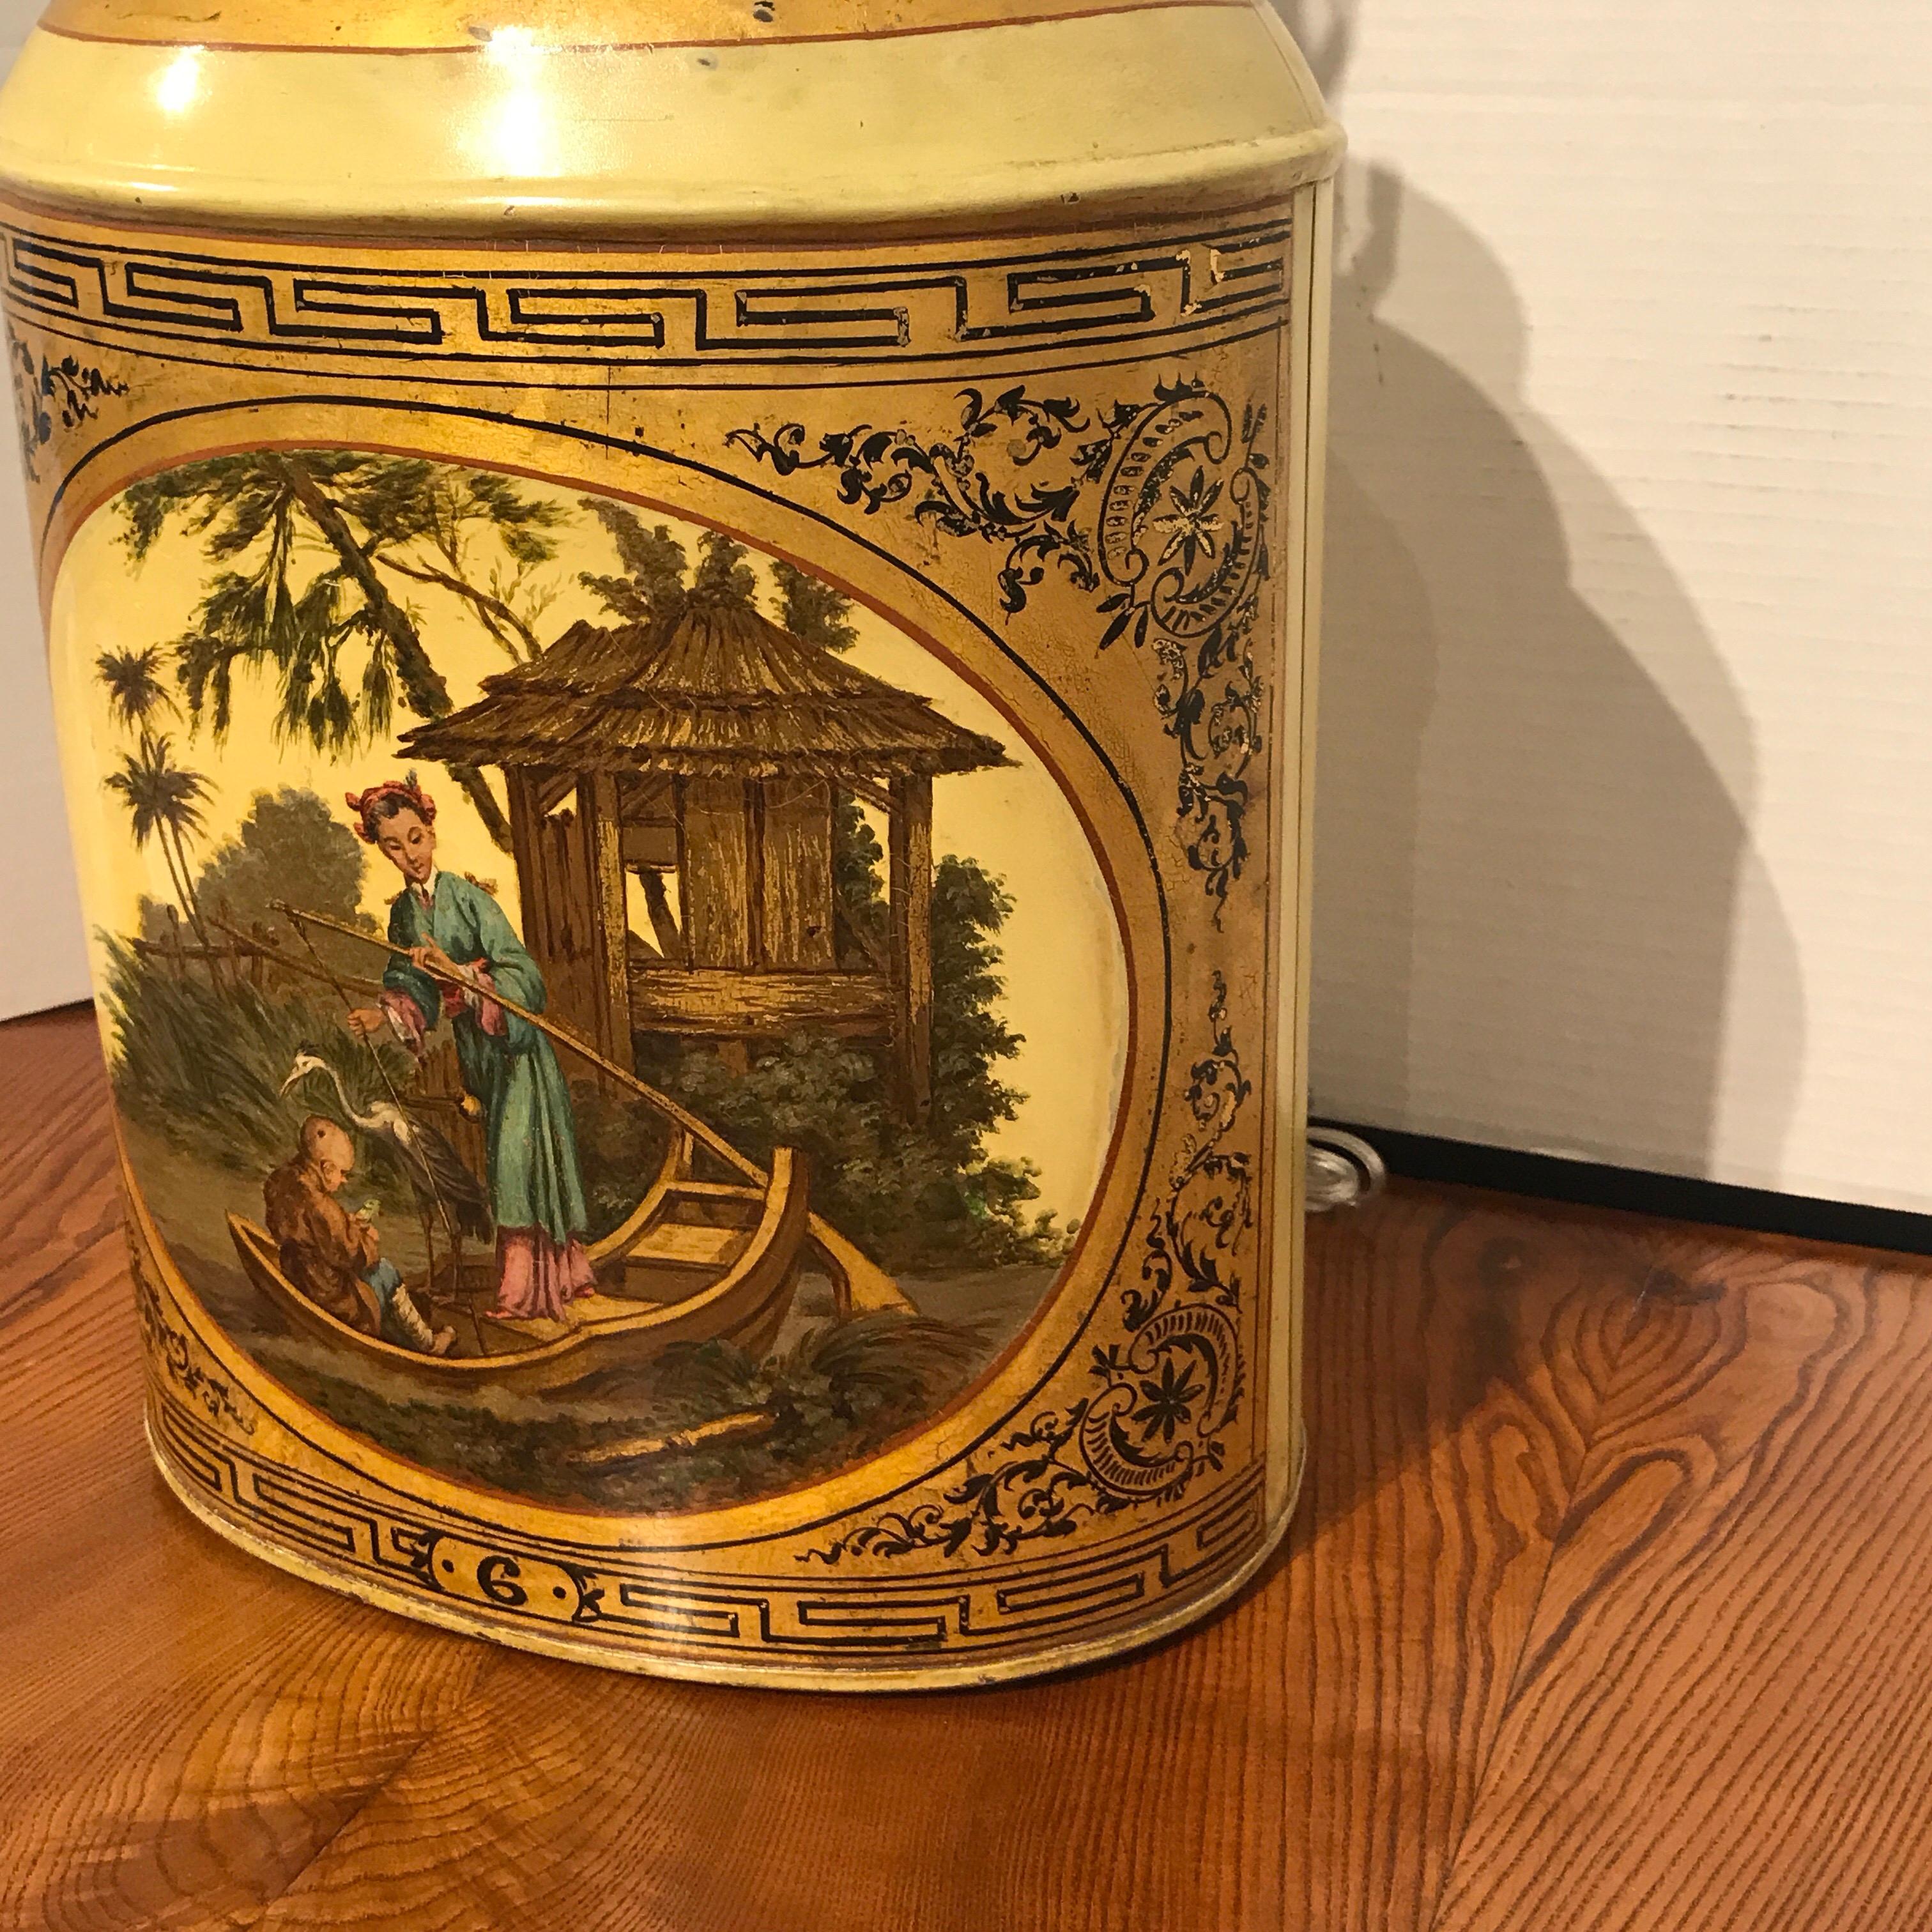 Regency Revival Antique English Chinoiserie #6 Tea Caddy Lamp For Sale